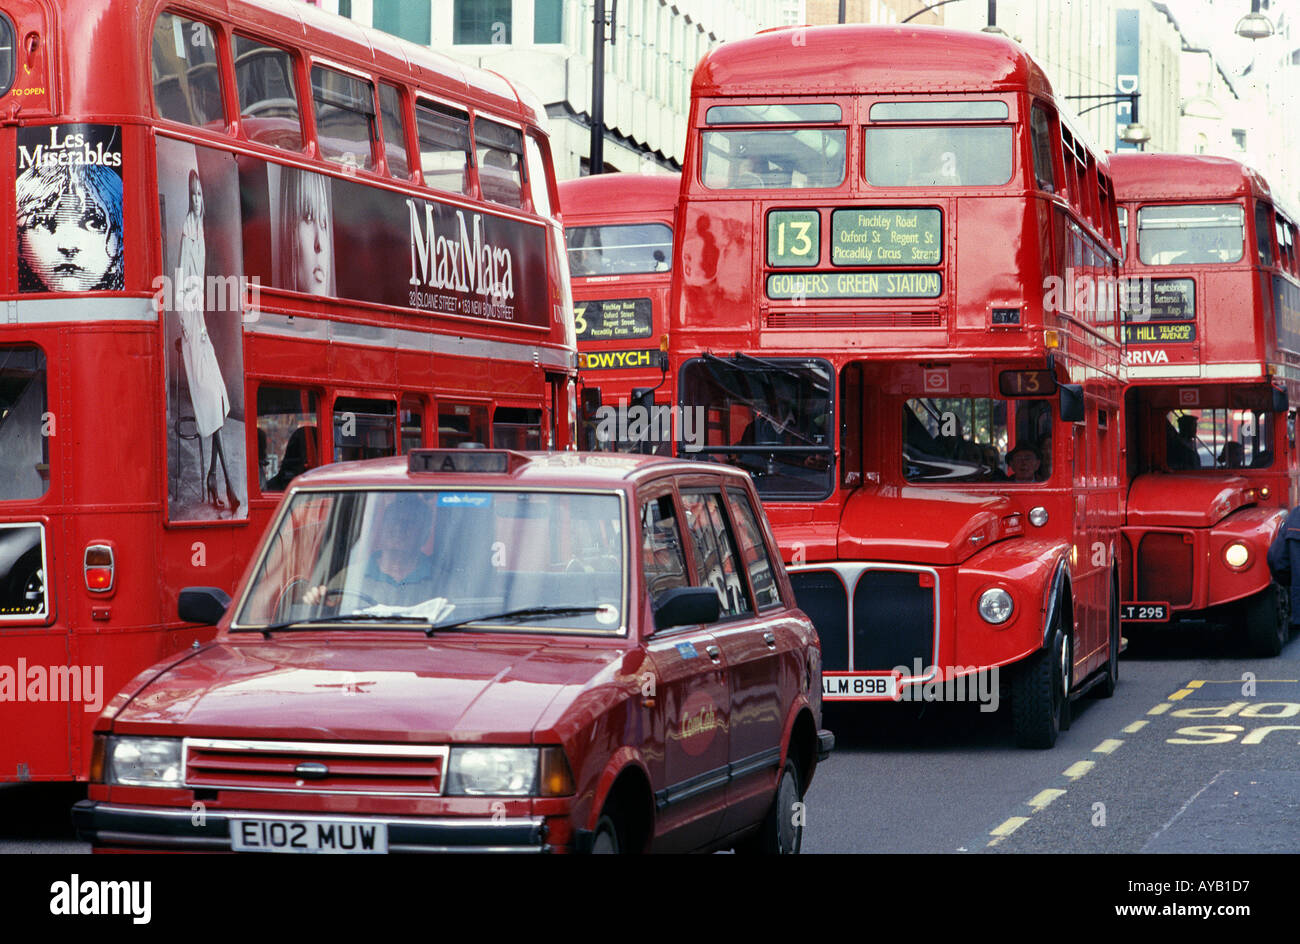 London Buses and Taxi Cab in Oxford Street London Stock Photo